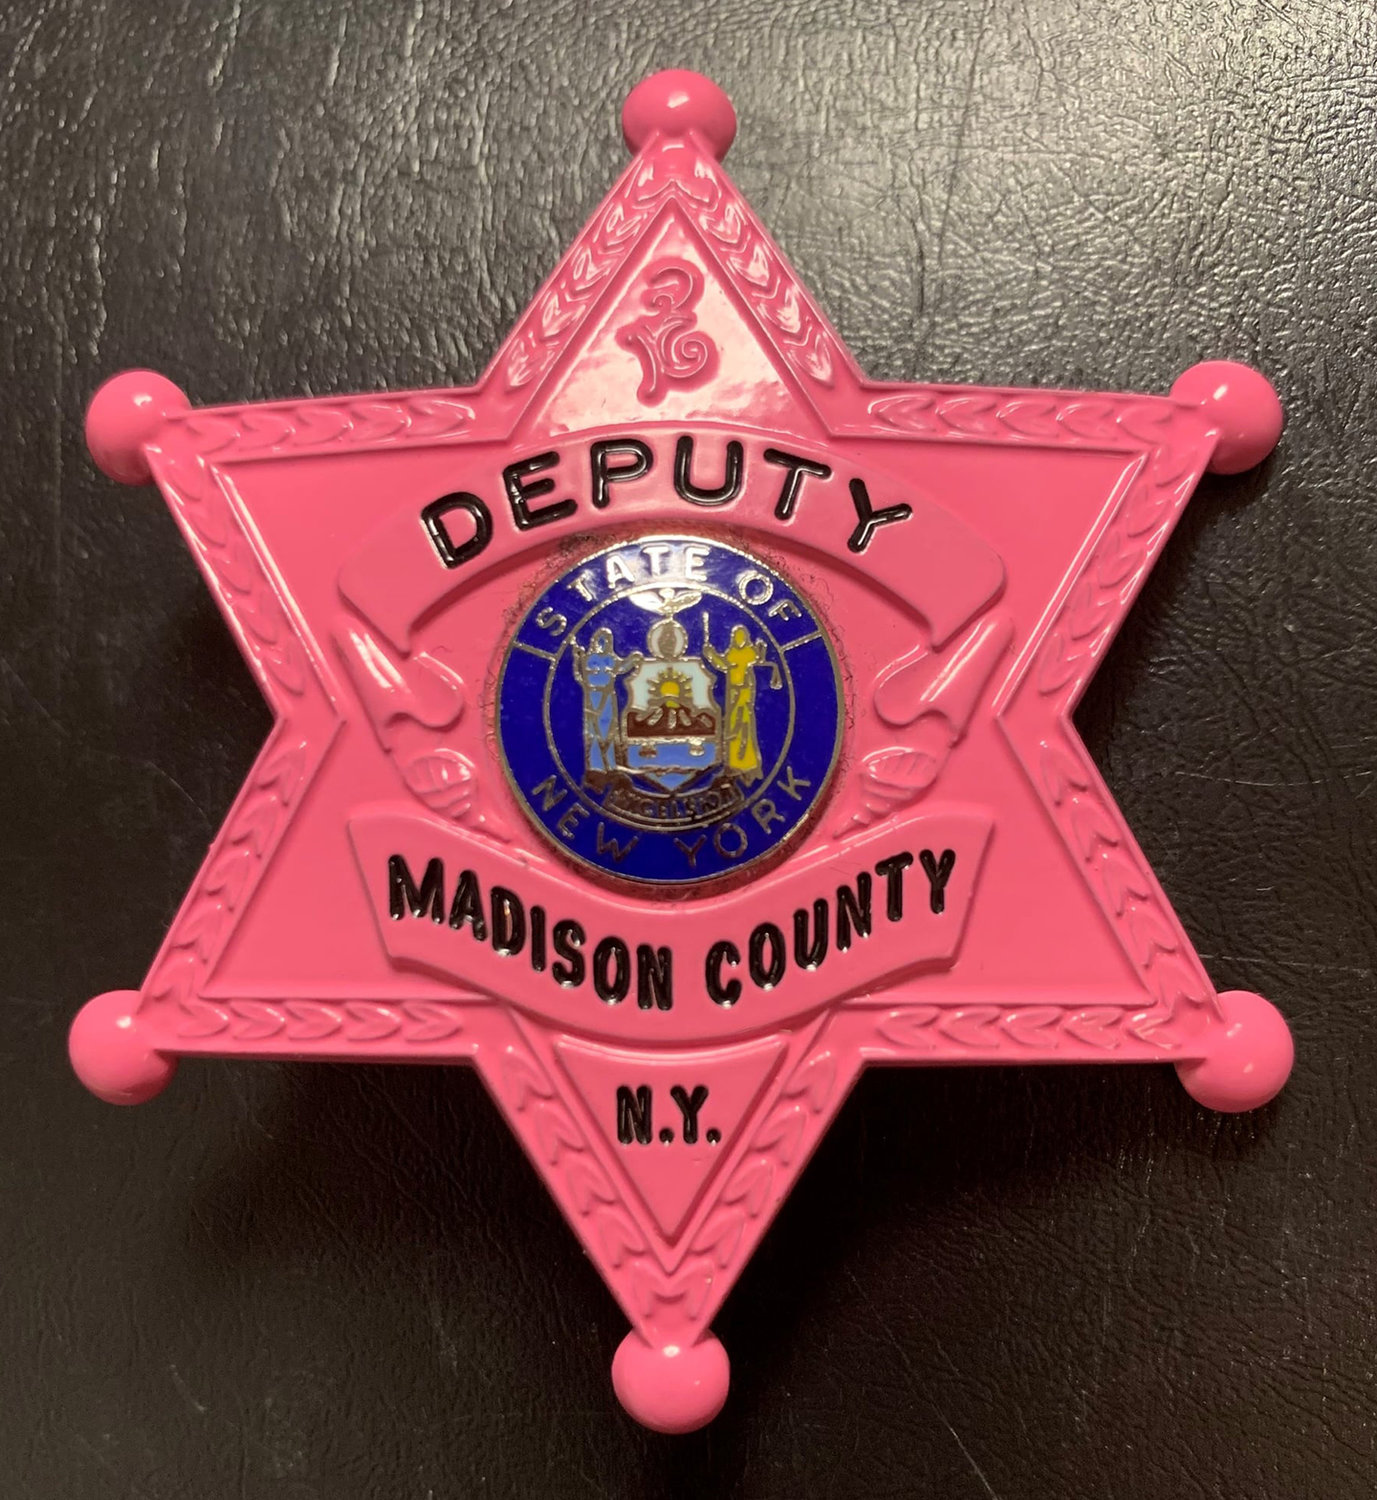 PINK BADGE — Pink badges worn this month by the Madison County Sheriff’s Office.